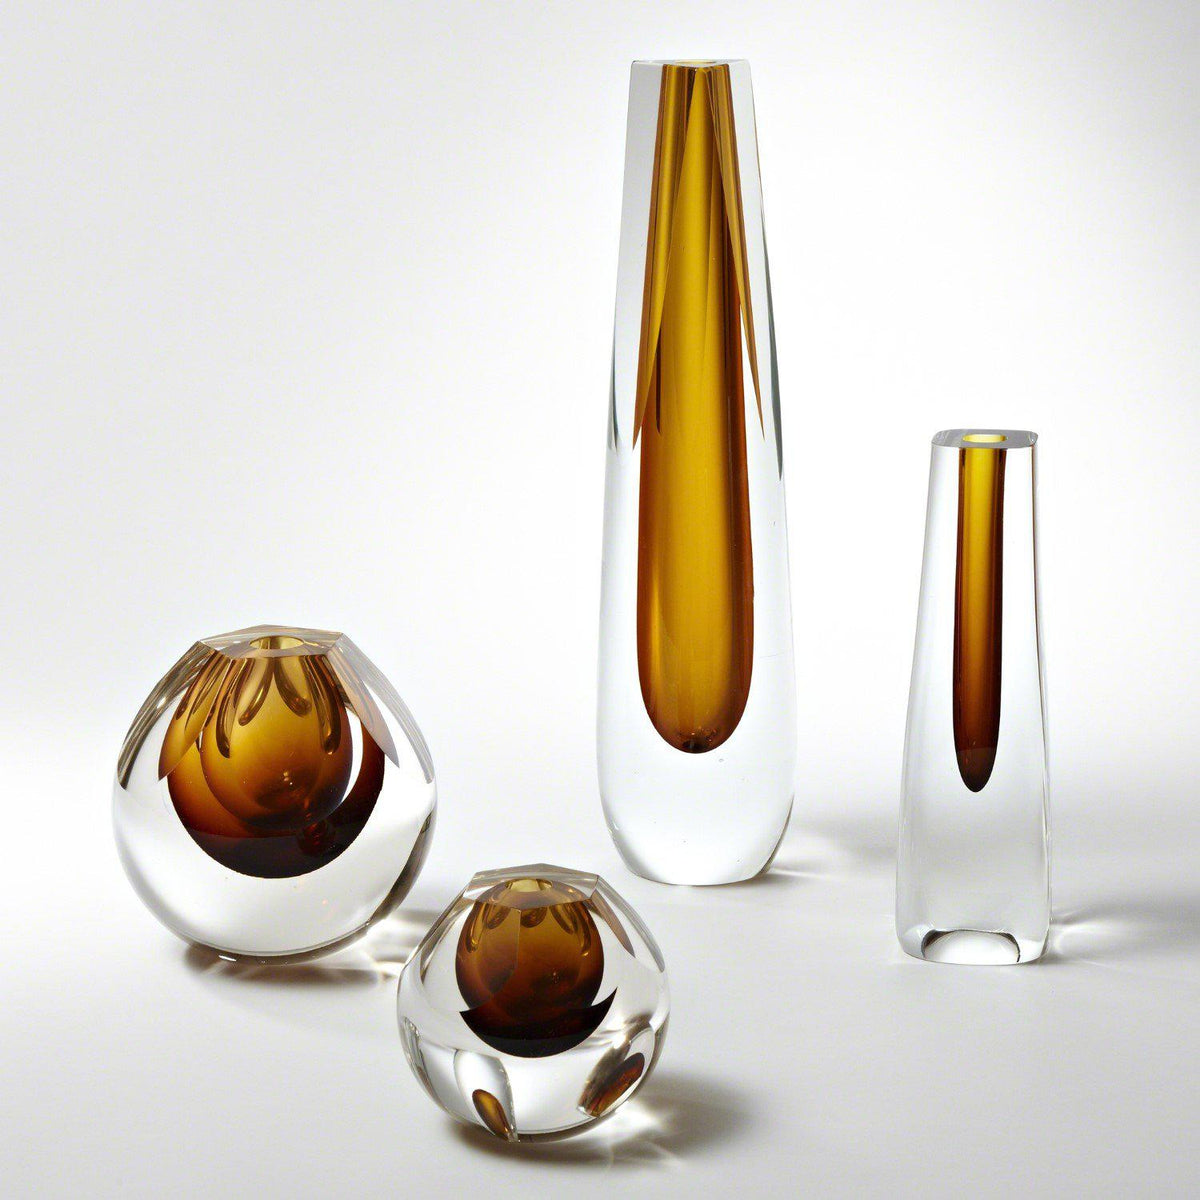 Triangle Cut Glass Vase-Global Views-Vases-Artistic Elements